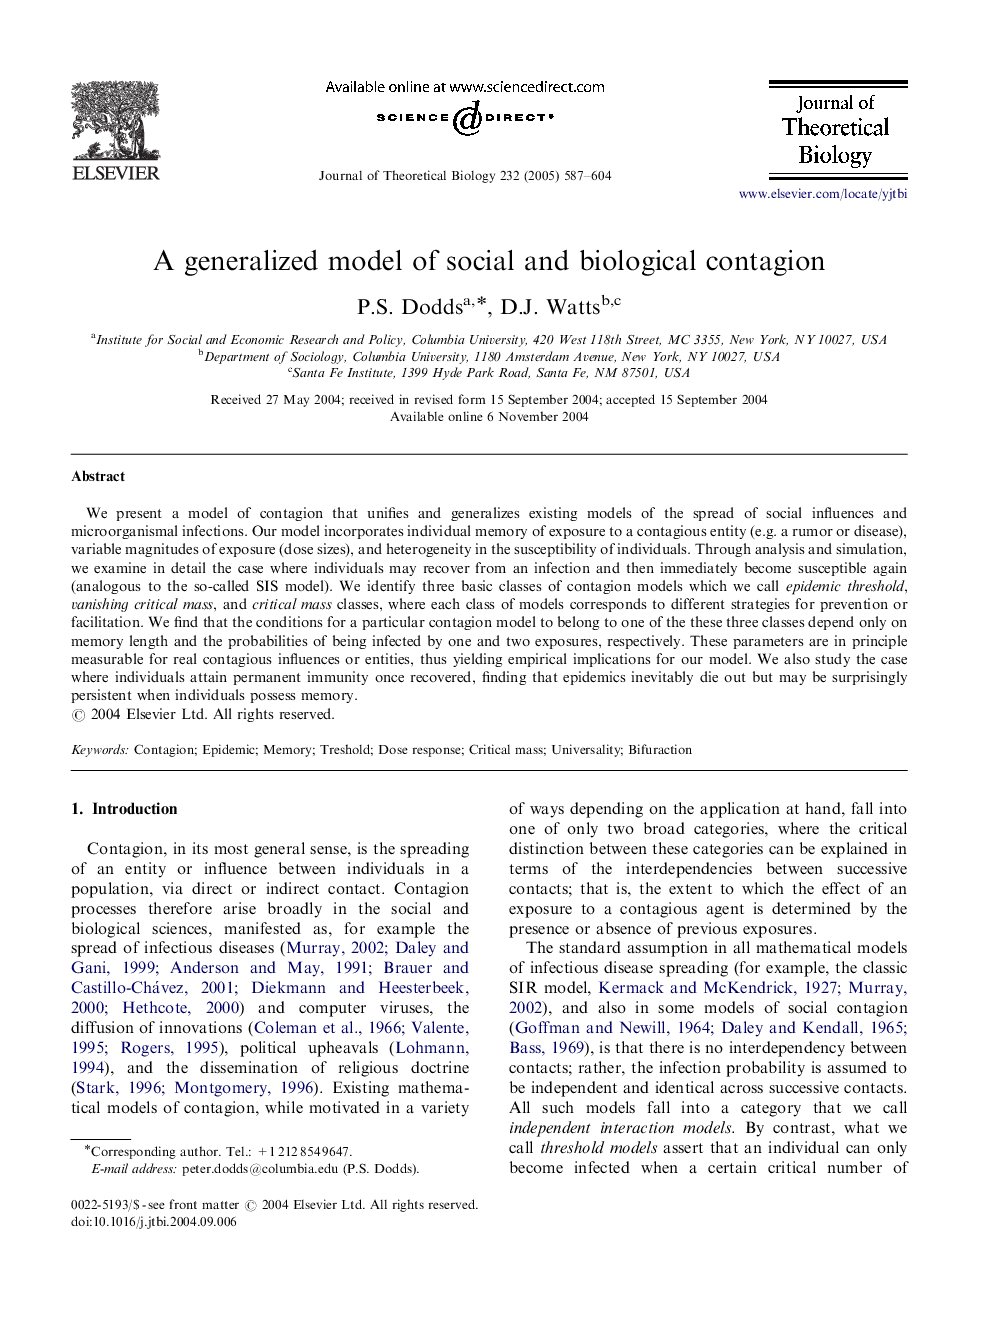 A generalized model of social and biological contagion